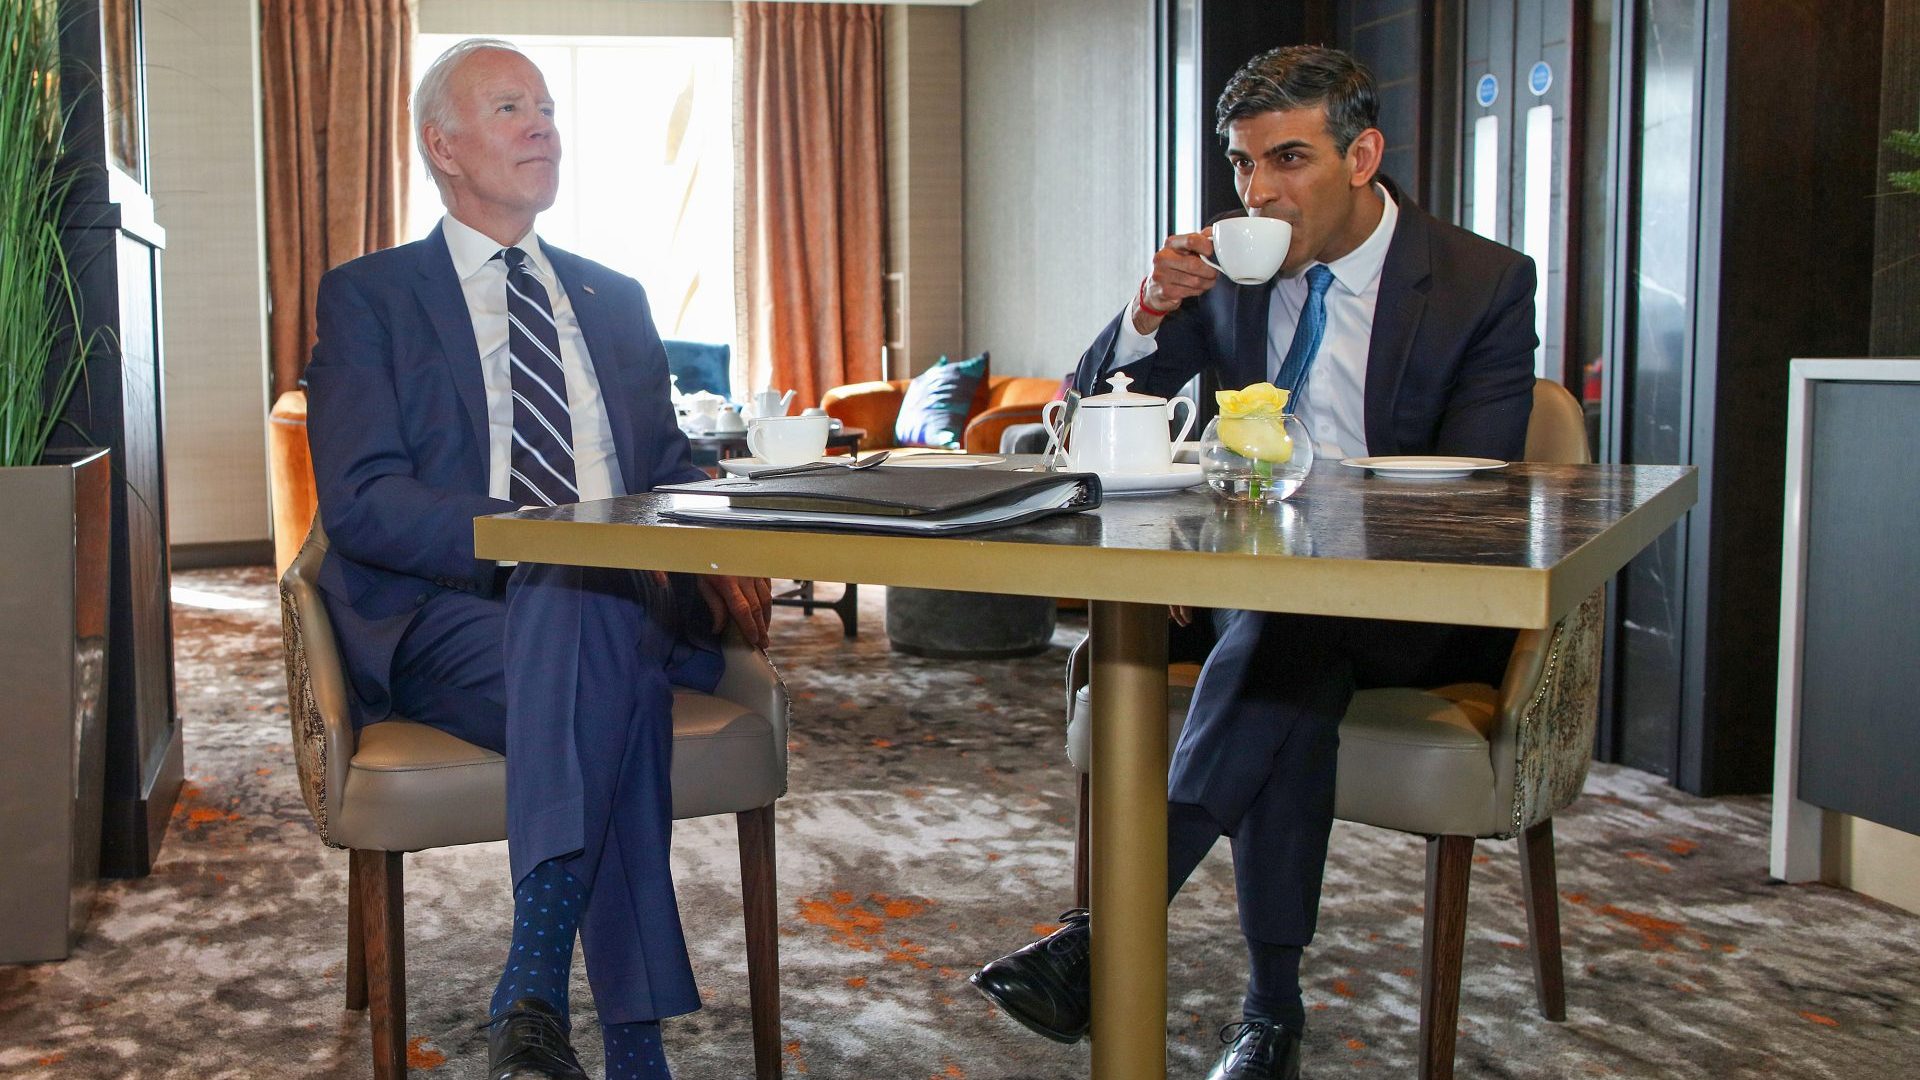 President Joe Biden meets with Prime Minister Rishi Sunak as part of a four day trip to Northern Ireland and Ireland for the 25th anniversary commemorations of the "Good Friday Agreement". Photo: Paul Faith - WPA Pool/Getty Images